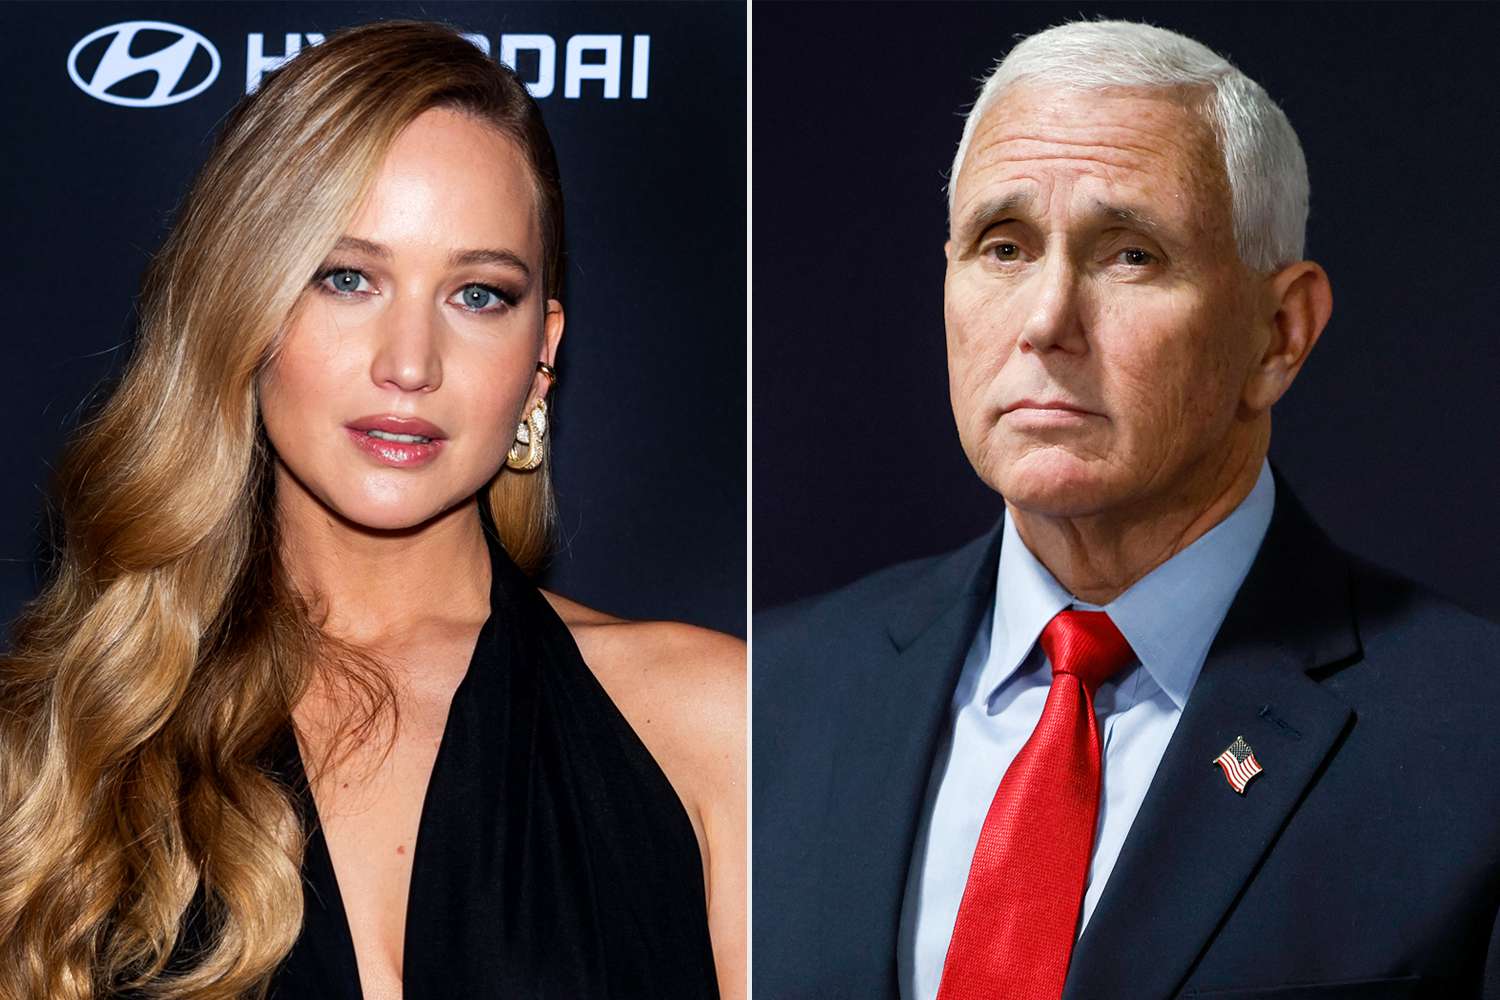 Jennifer Lawrence Takes Jab at Mike Pence in GLAAD Media Awards Speech [Video]